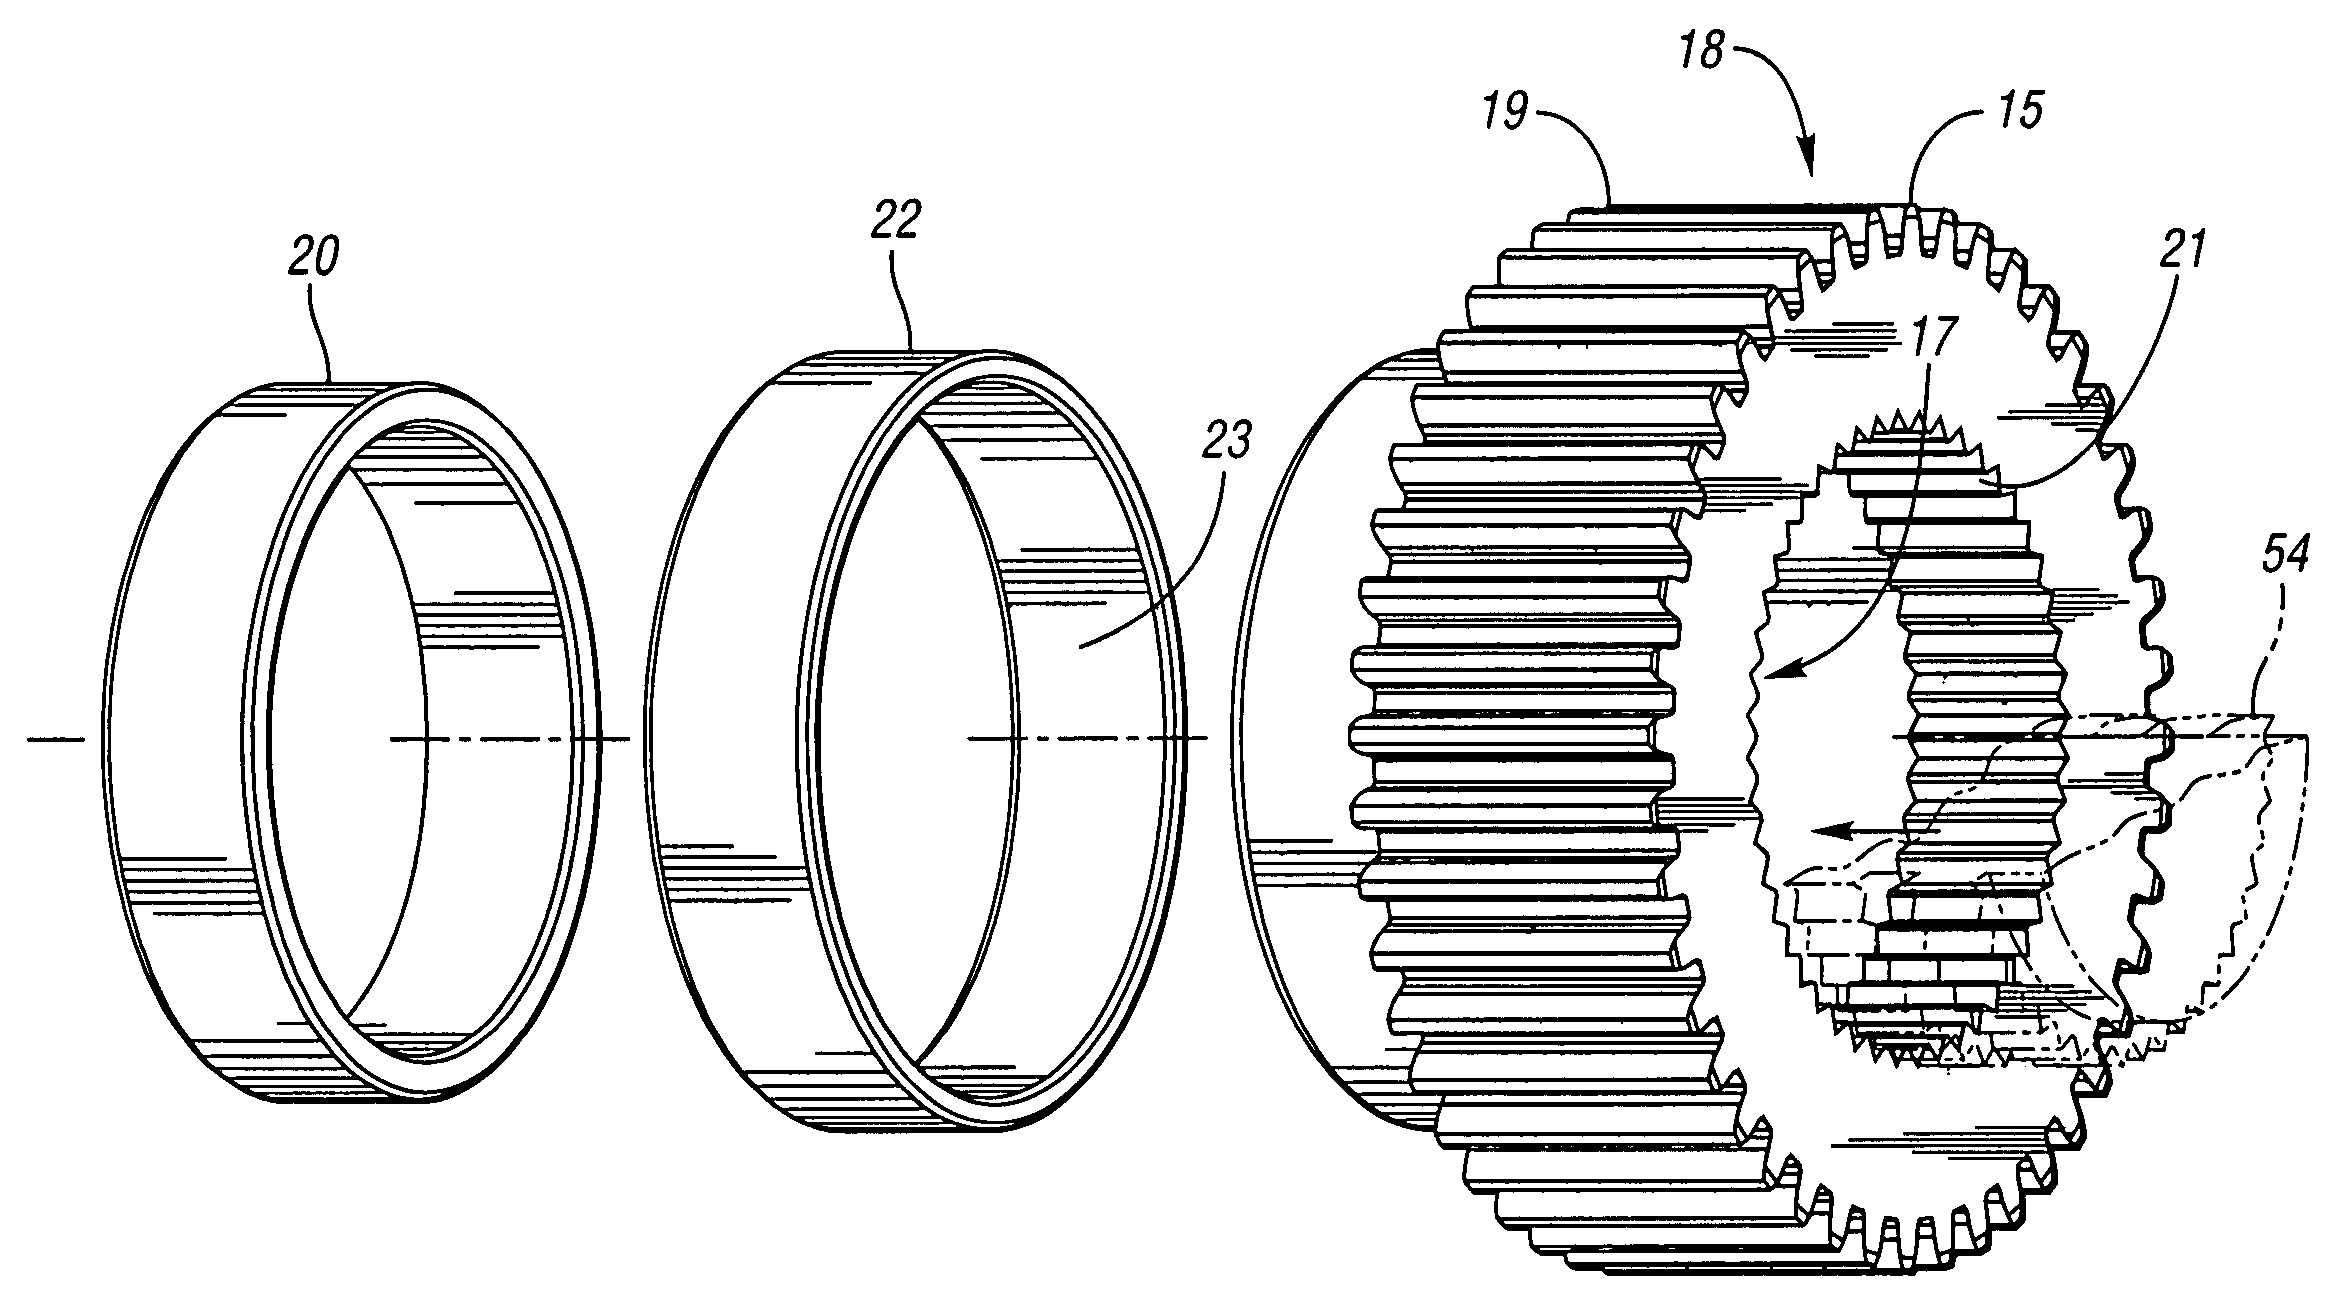 Sun gear bushing and sleeve and method for sealing in a hybrid electromechanical automatic transmission